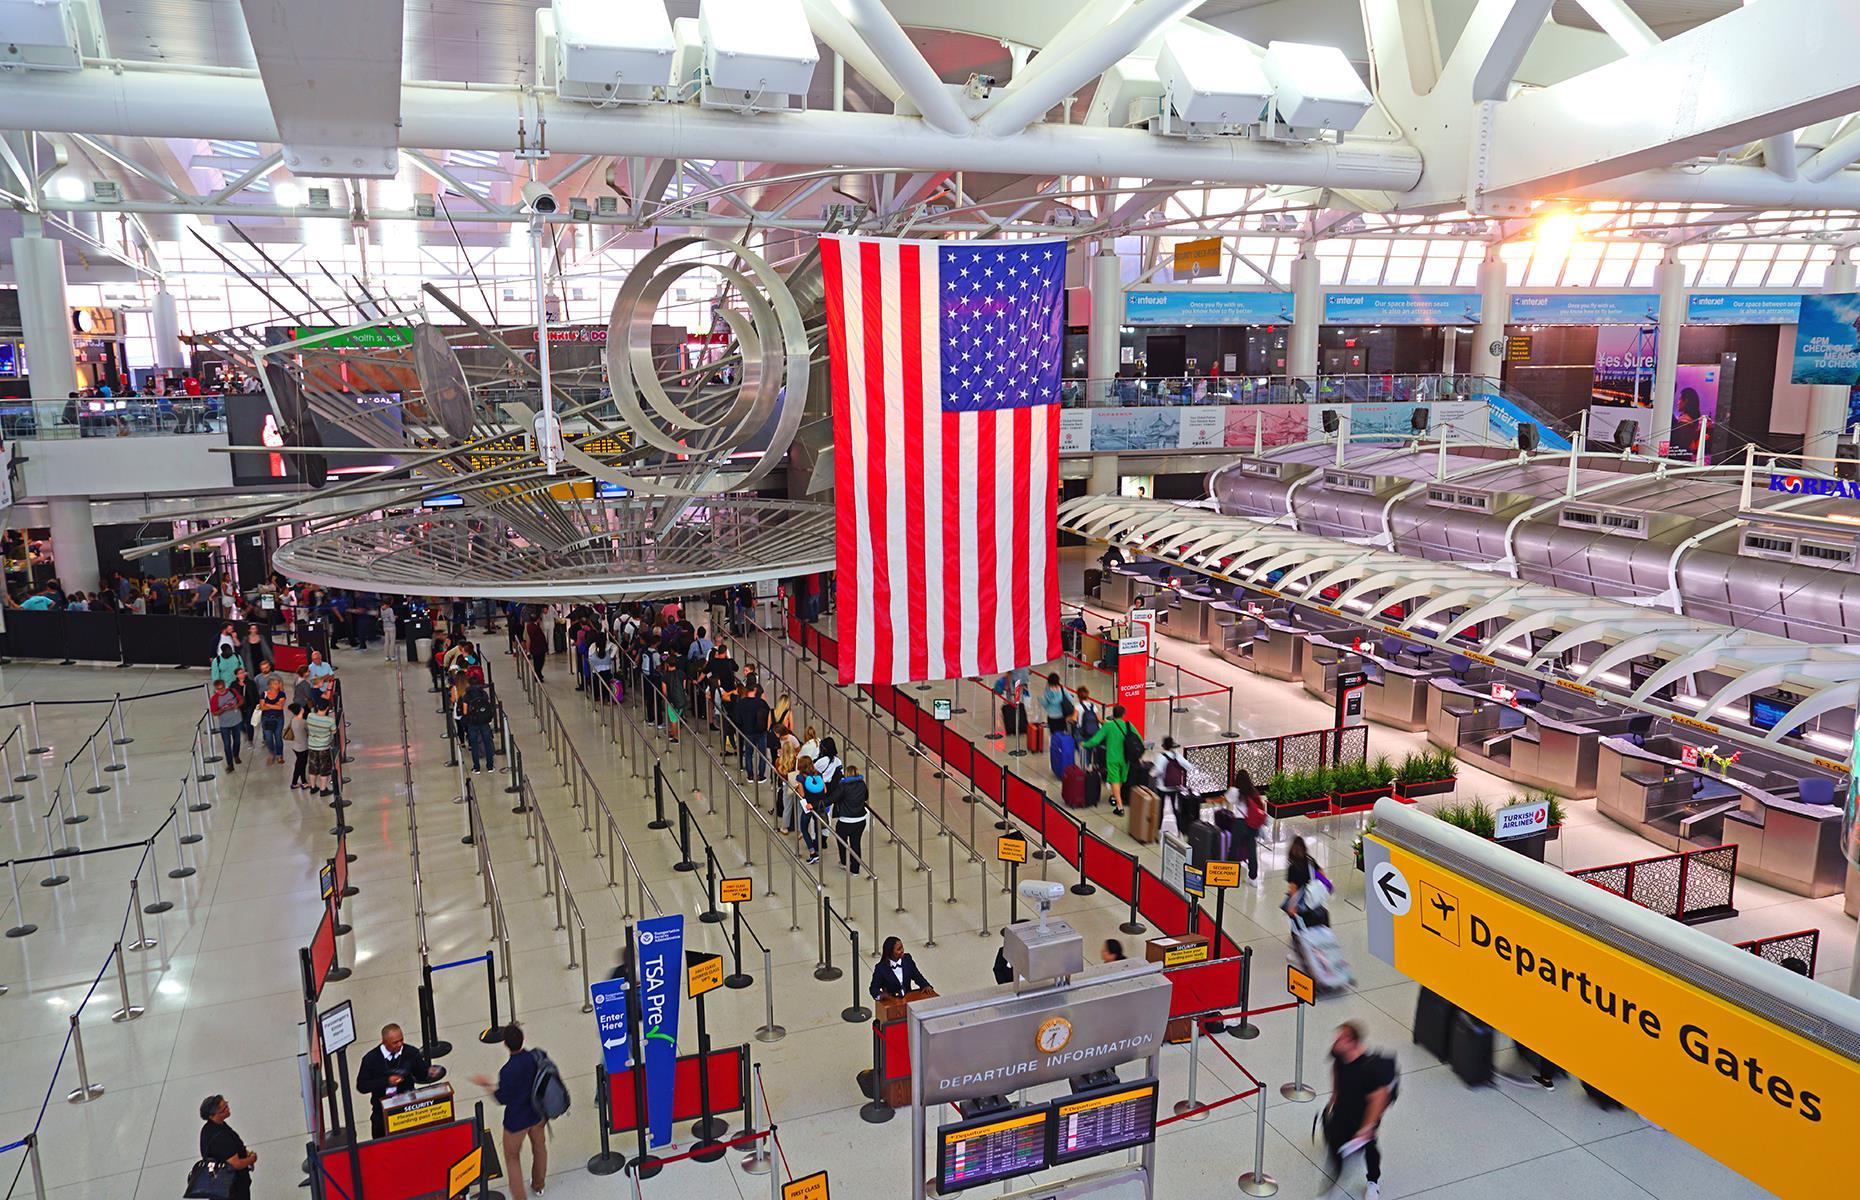 <p>Three major airports serve New York City: LaGuardia, Newark and John F. Kennedy (JFK). While the latter is the busiest – JFK flew passengers to <a href="https://jfkairport.net/statistics/">74 countries in January 2020</a> on more than 34,000 flights – it’s also favored by travelers, ranking second in the Mega Airports category of <a href="https://www.jdpower.com/business/press-releases/2021-north-america-airport-satisfaction-study">J.D. Power’s 2021 Airport Satisfaction Index</a>. Plus, with an enormous range of shopping and dining outlets, you’re unlikely to ever get bored here. </p>